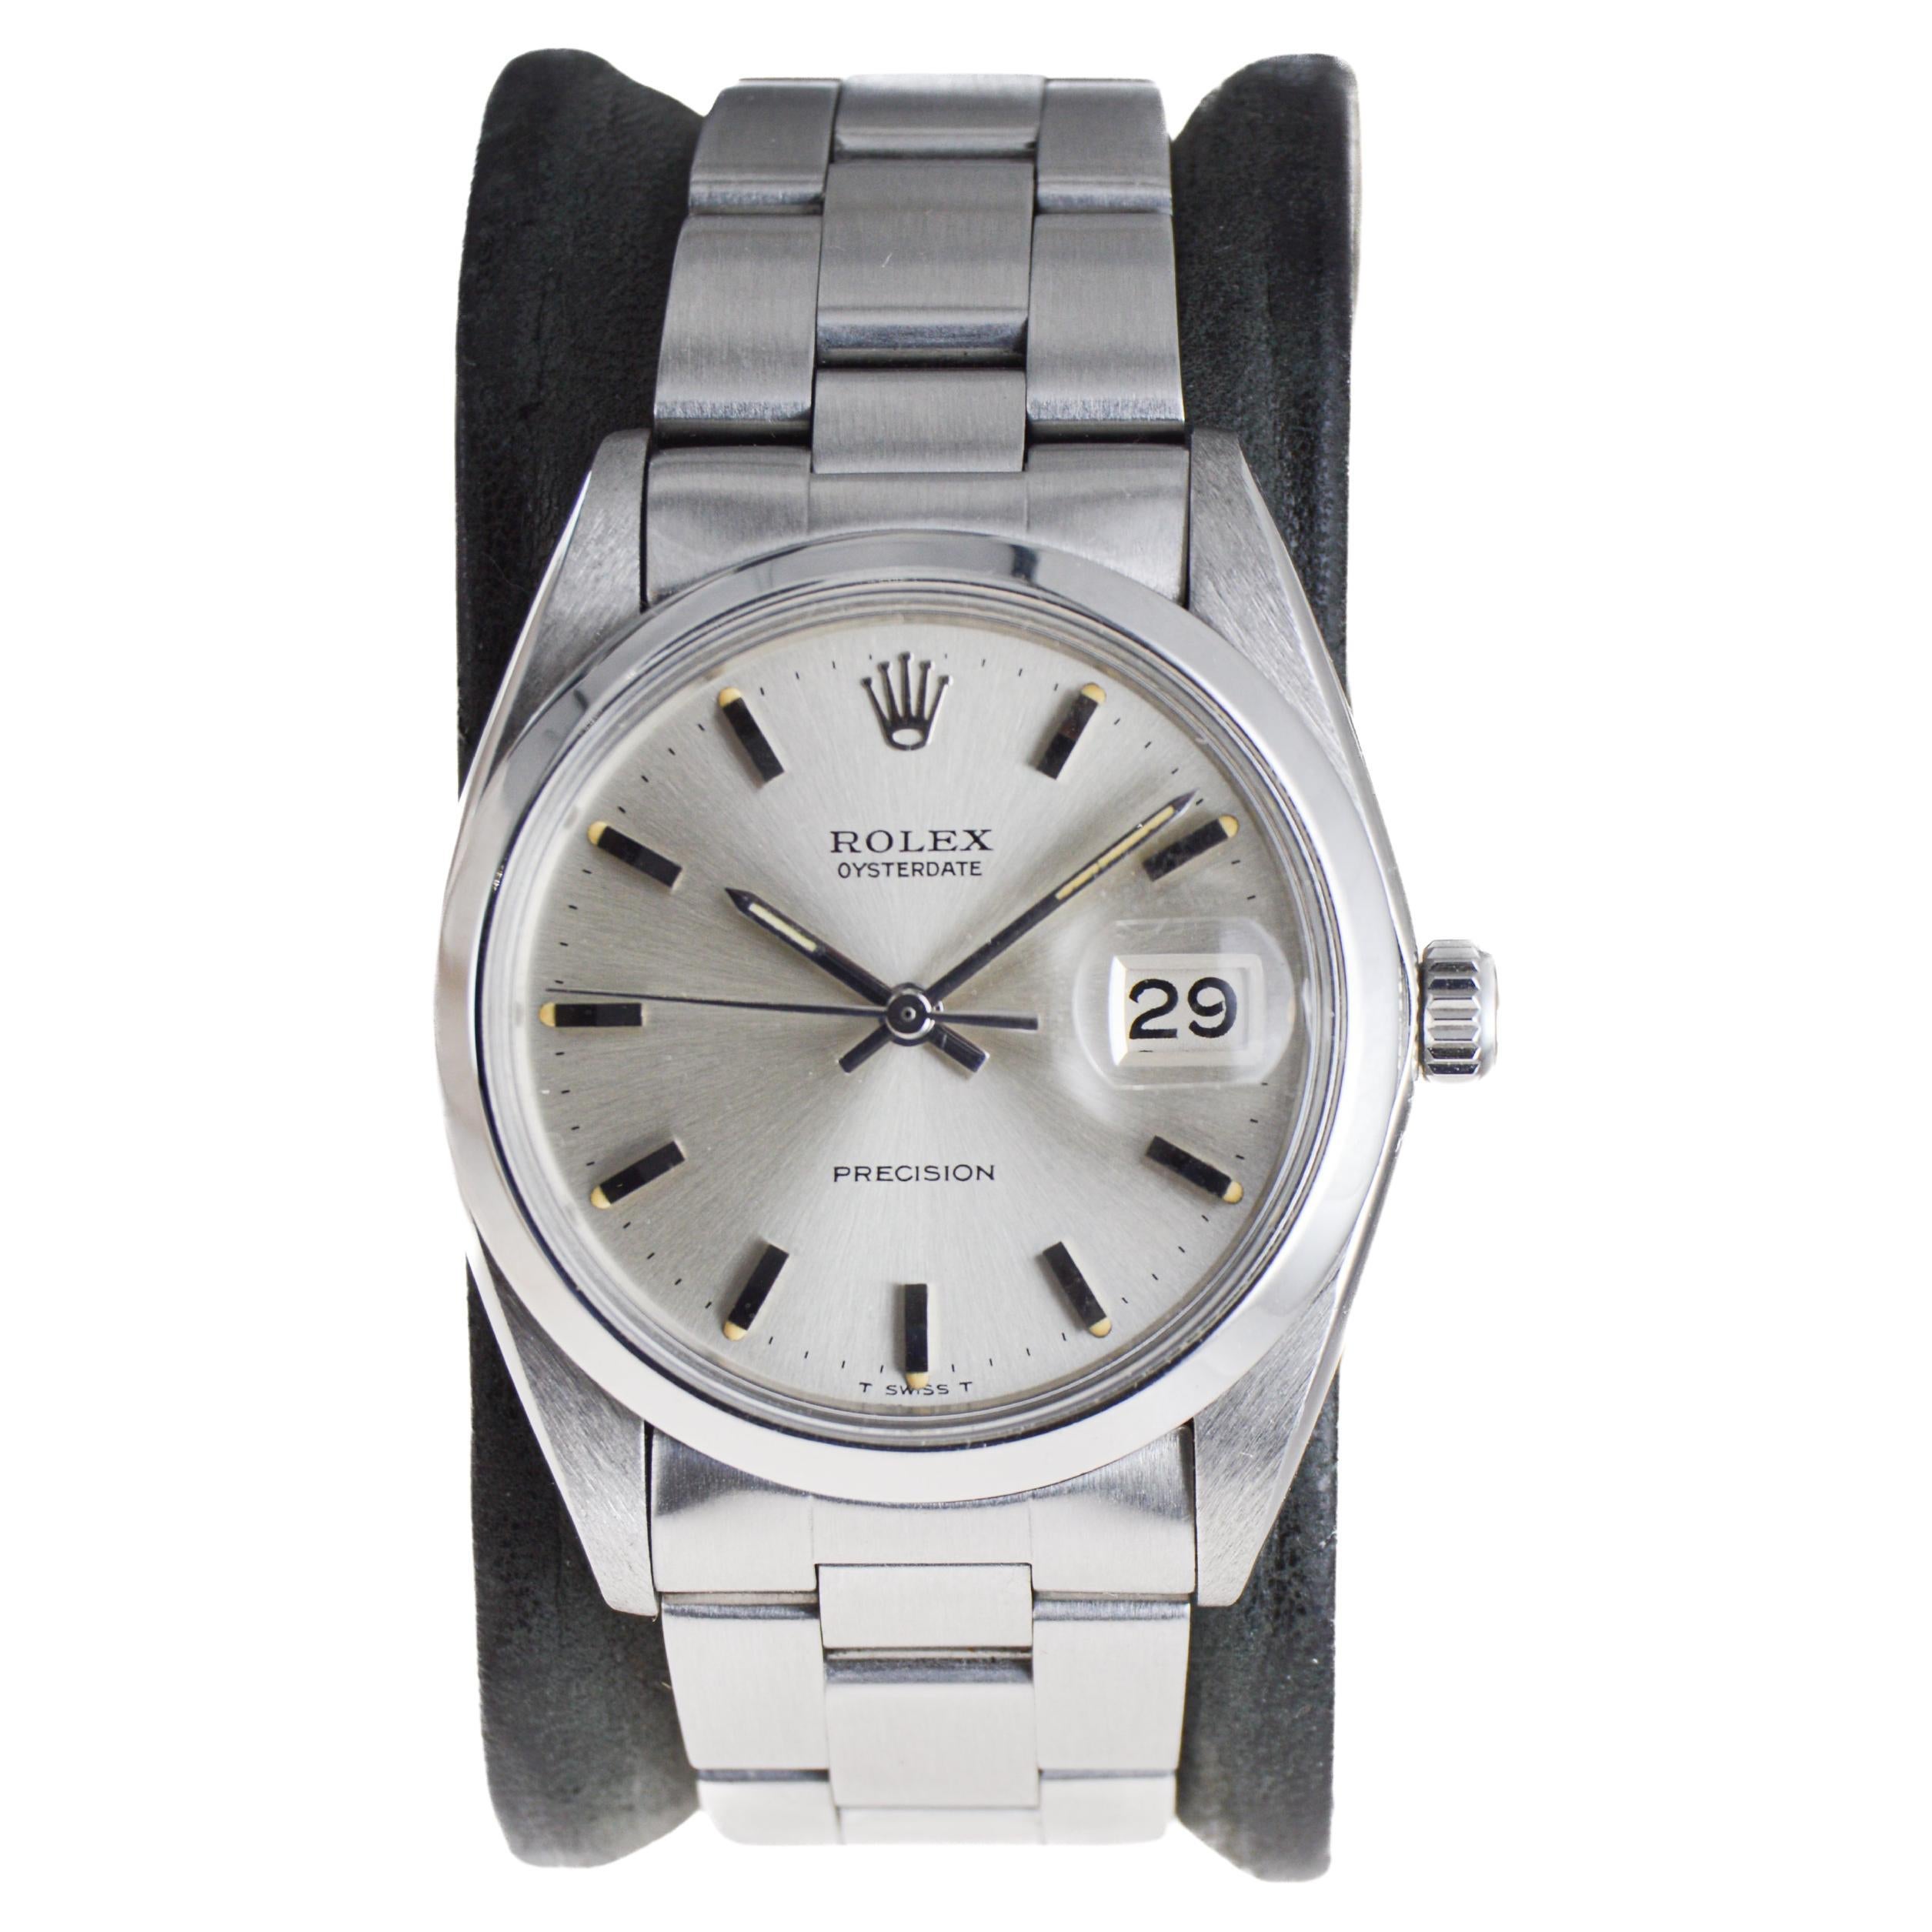 Rolex Stainless Steel Oysterdate with Factory Original Silver Dial circa, 1967 For Sale